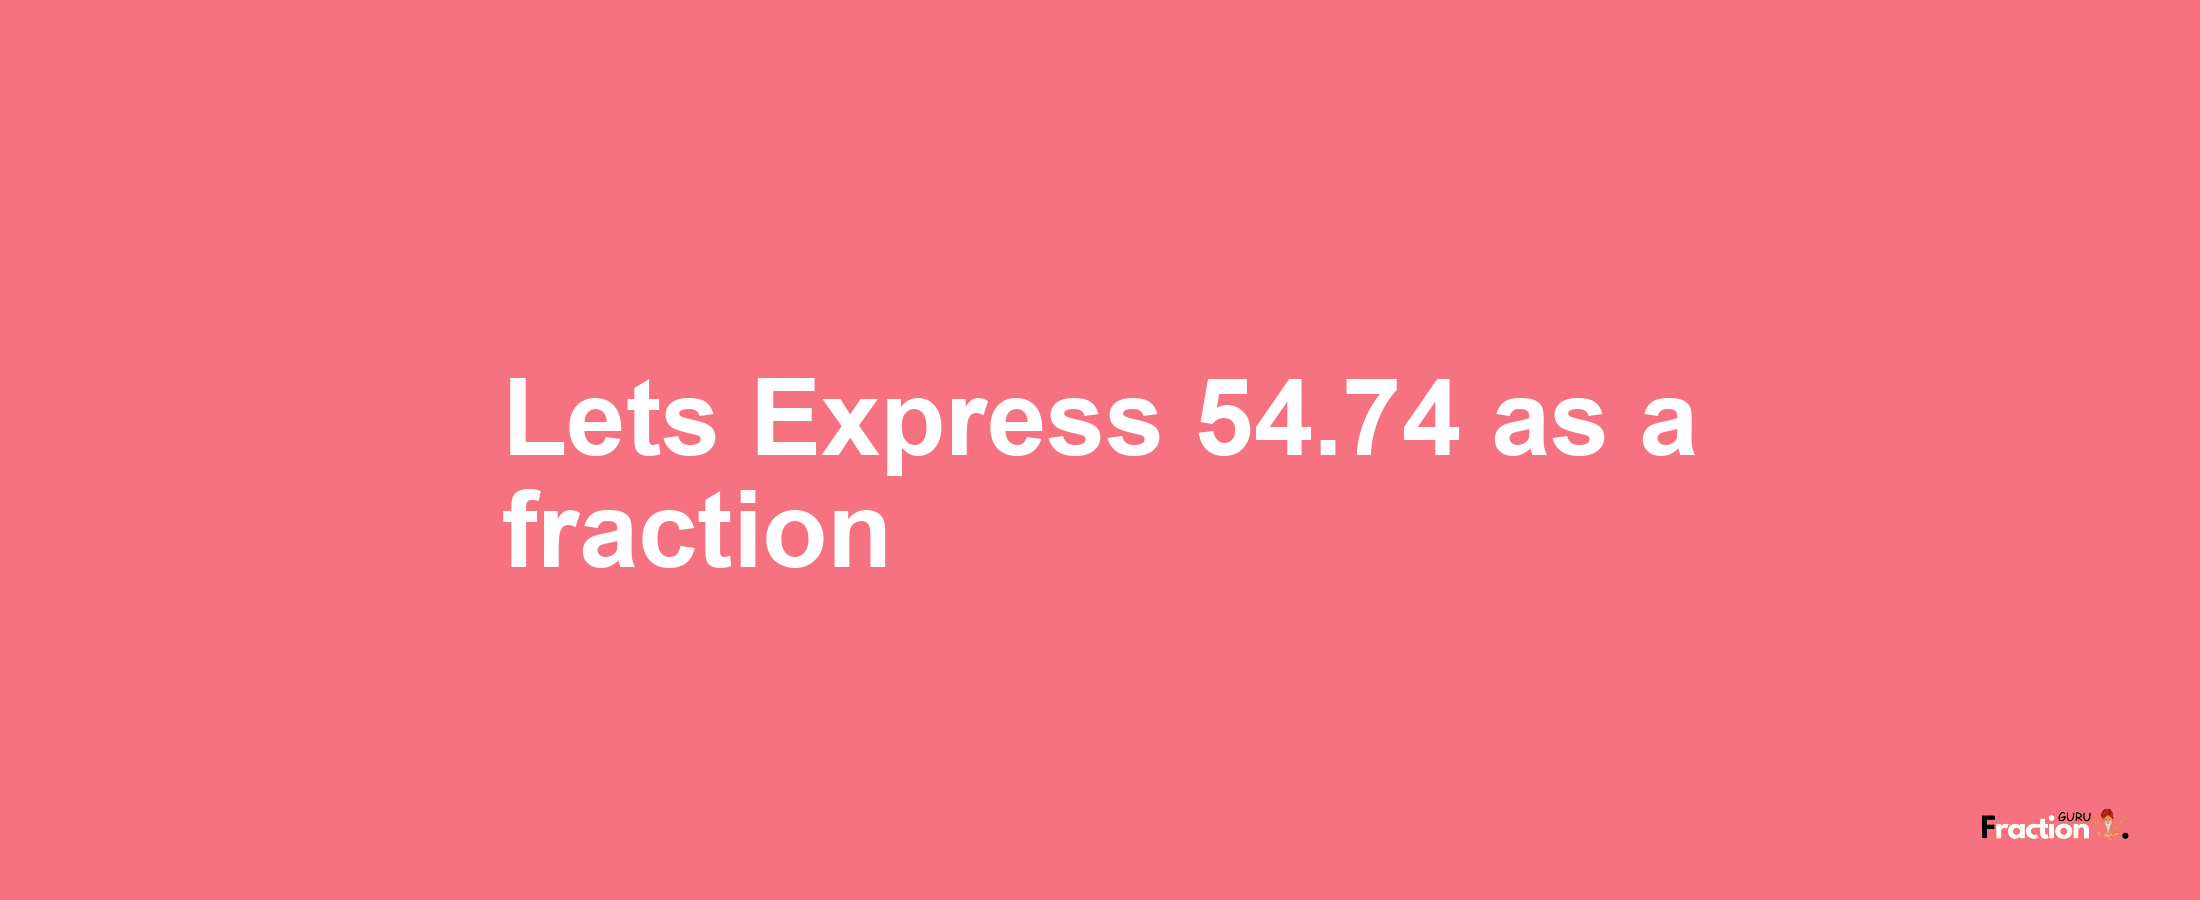 Lets Express 54.74 as afraction